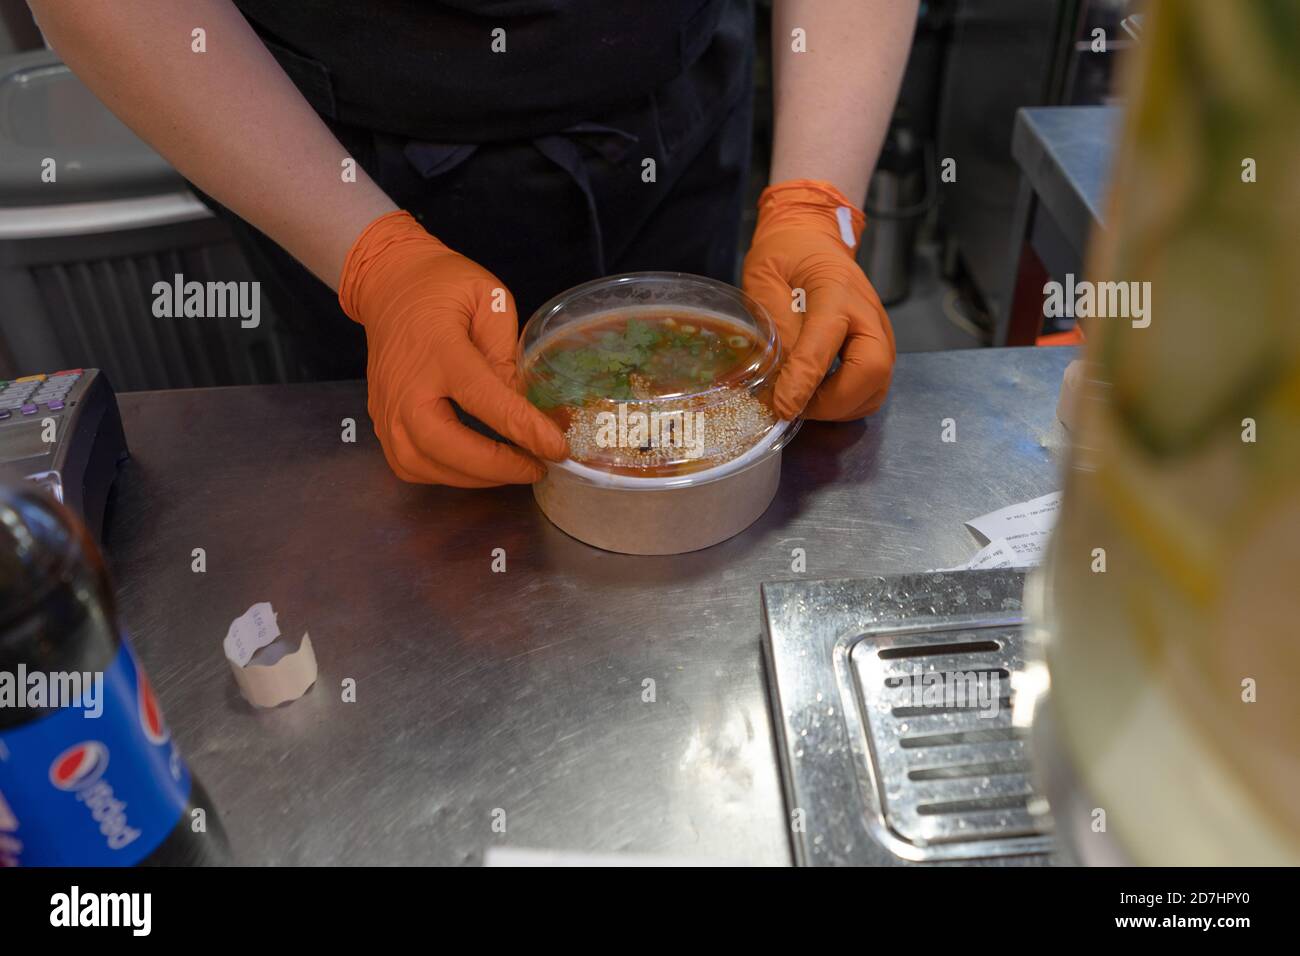 Worker wearing gloves packs tom yum soup into container. Asian restaurant. June 2020. Kyiv, Ukraine Stock Photo